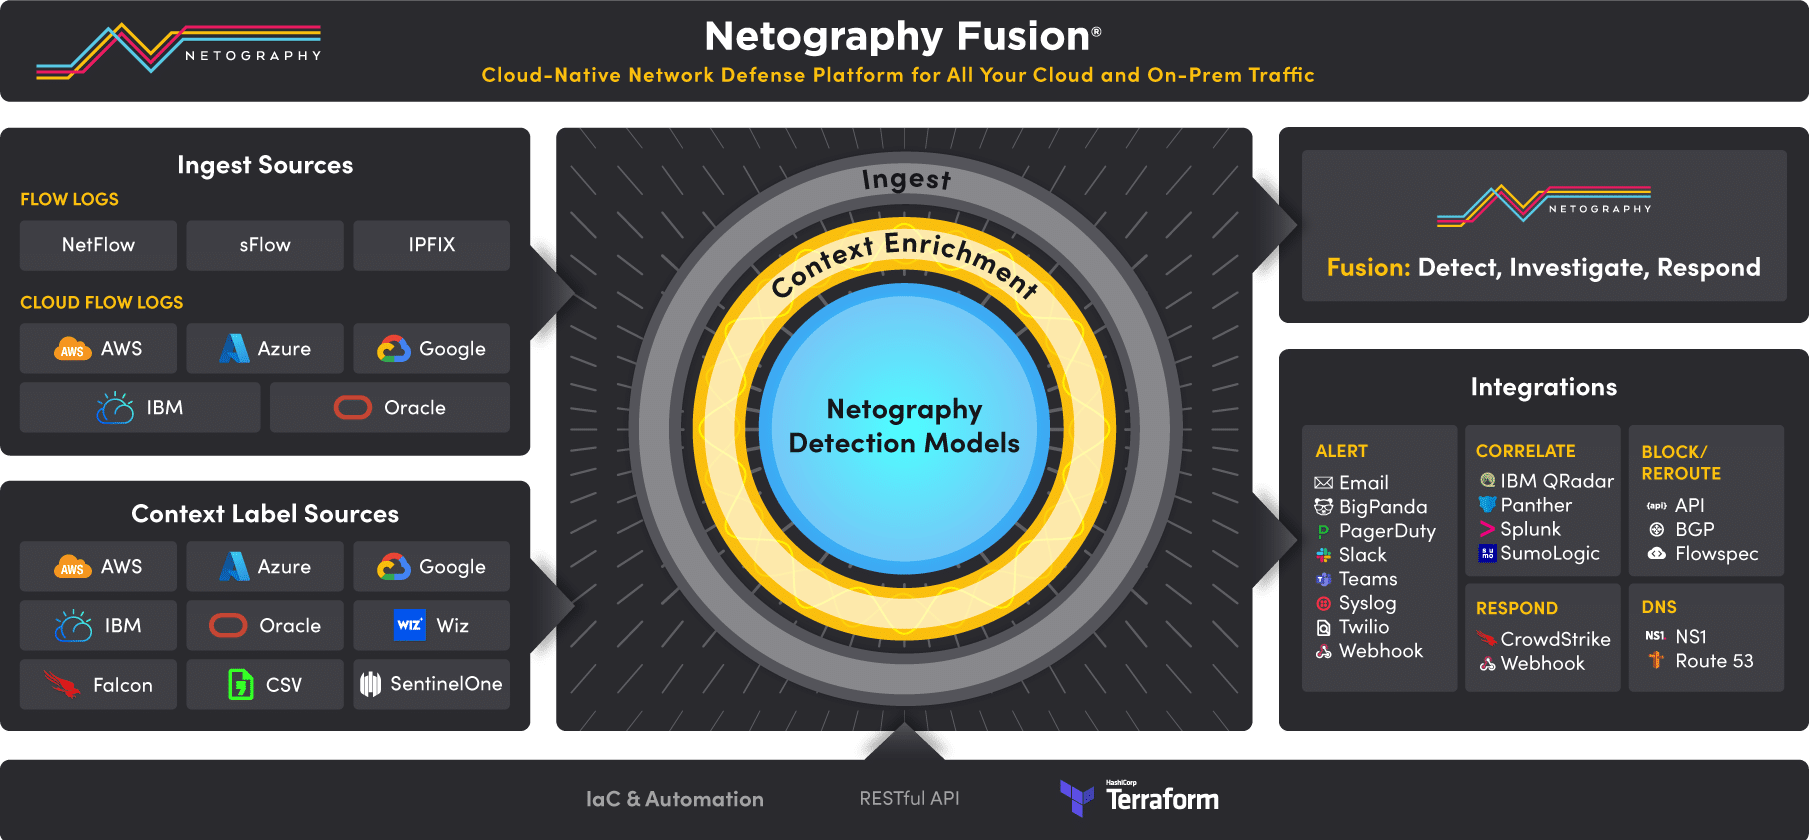 How Netography Works